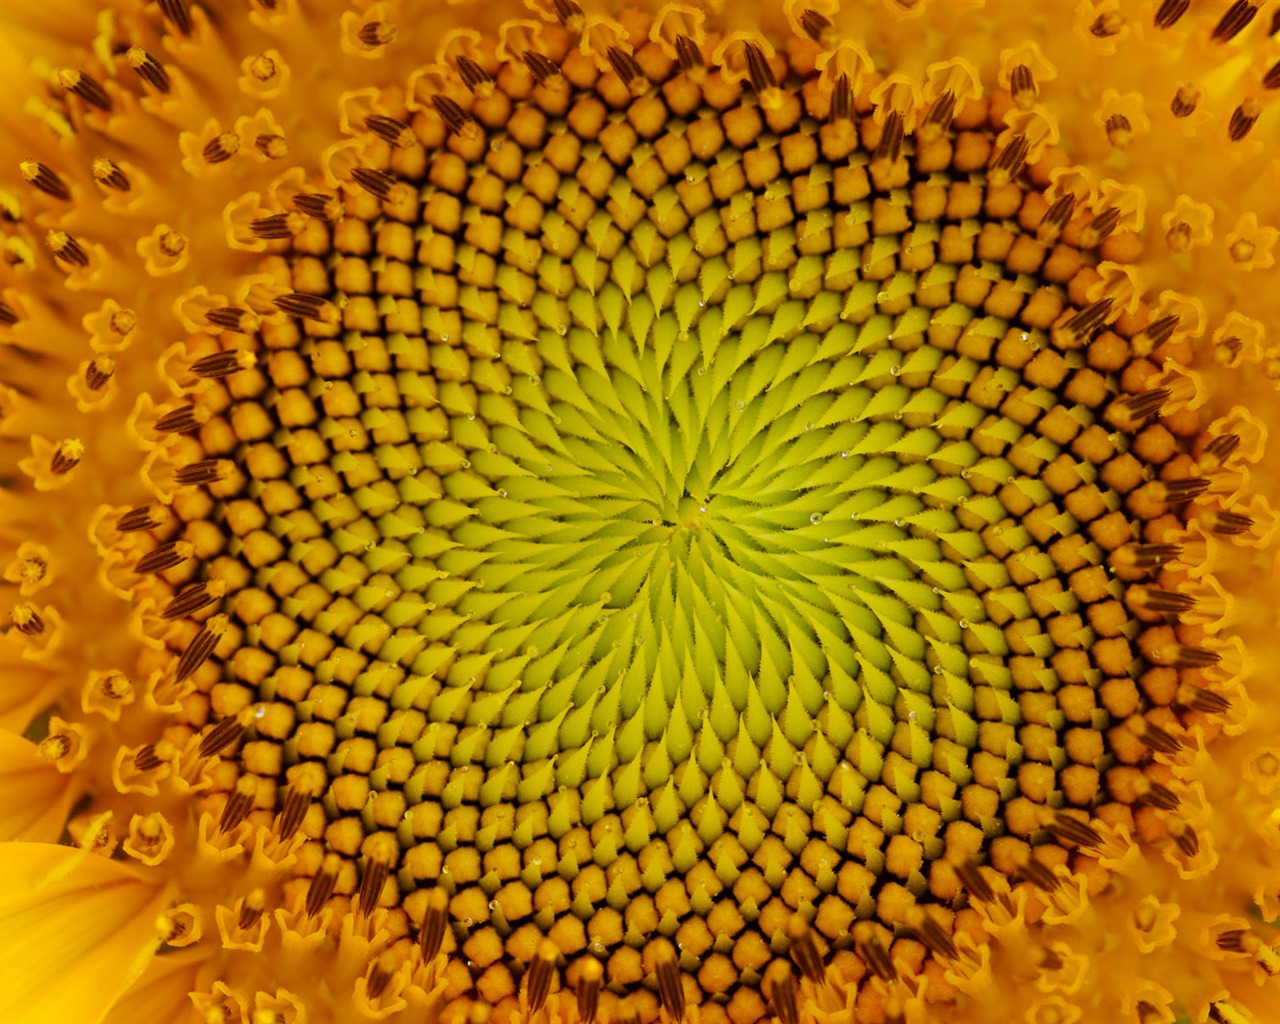 Sunny sunflower photo HD Wallpapers #30 - 1280x1024